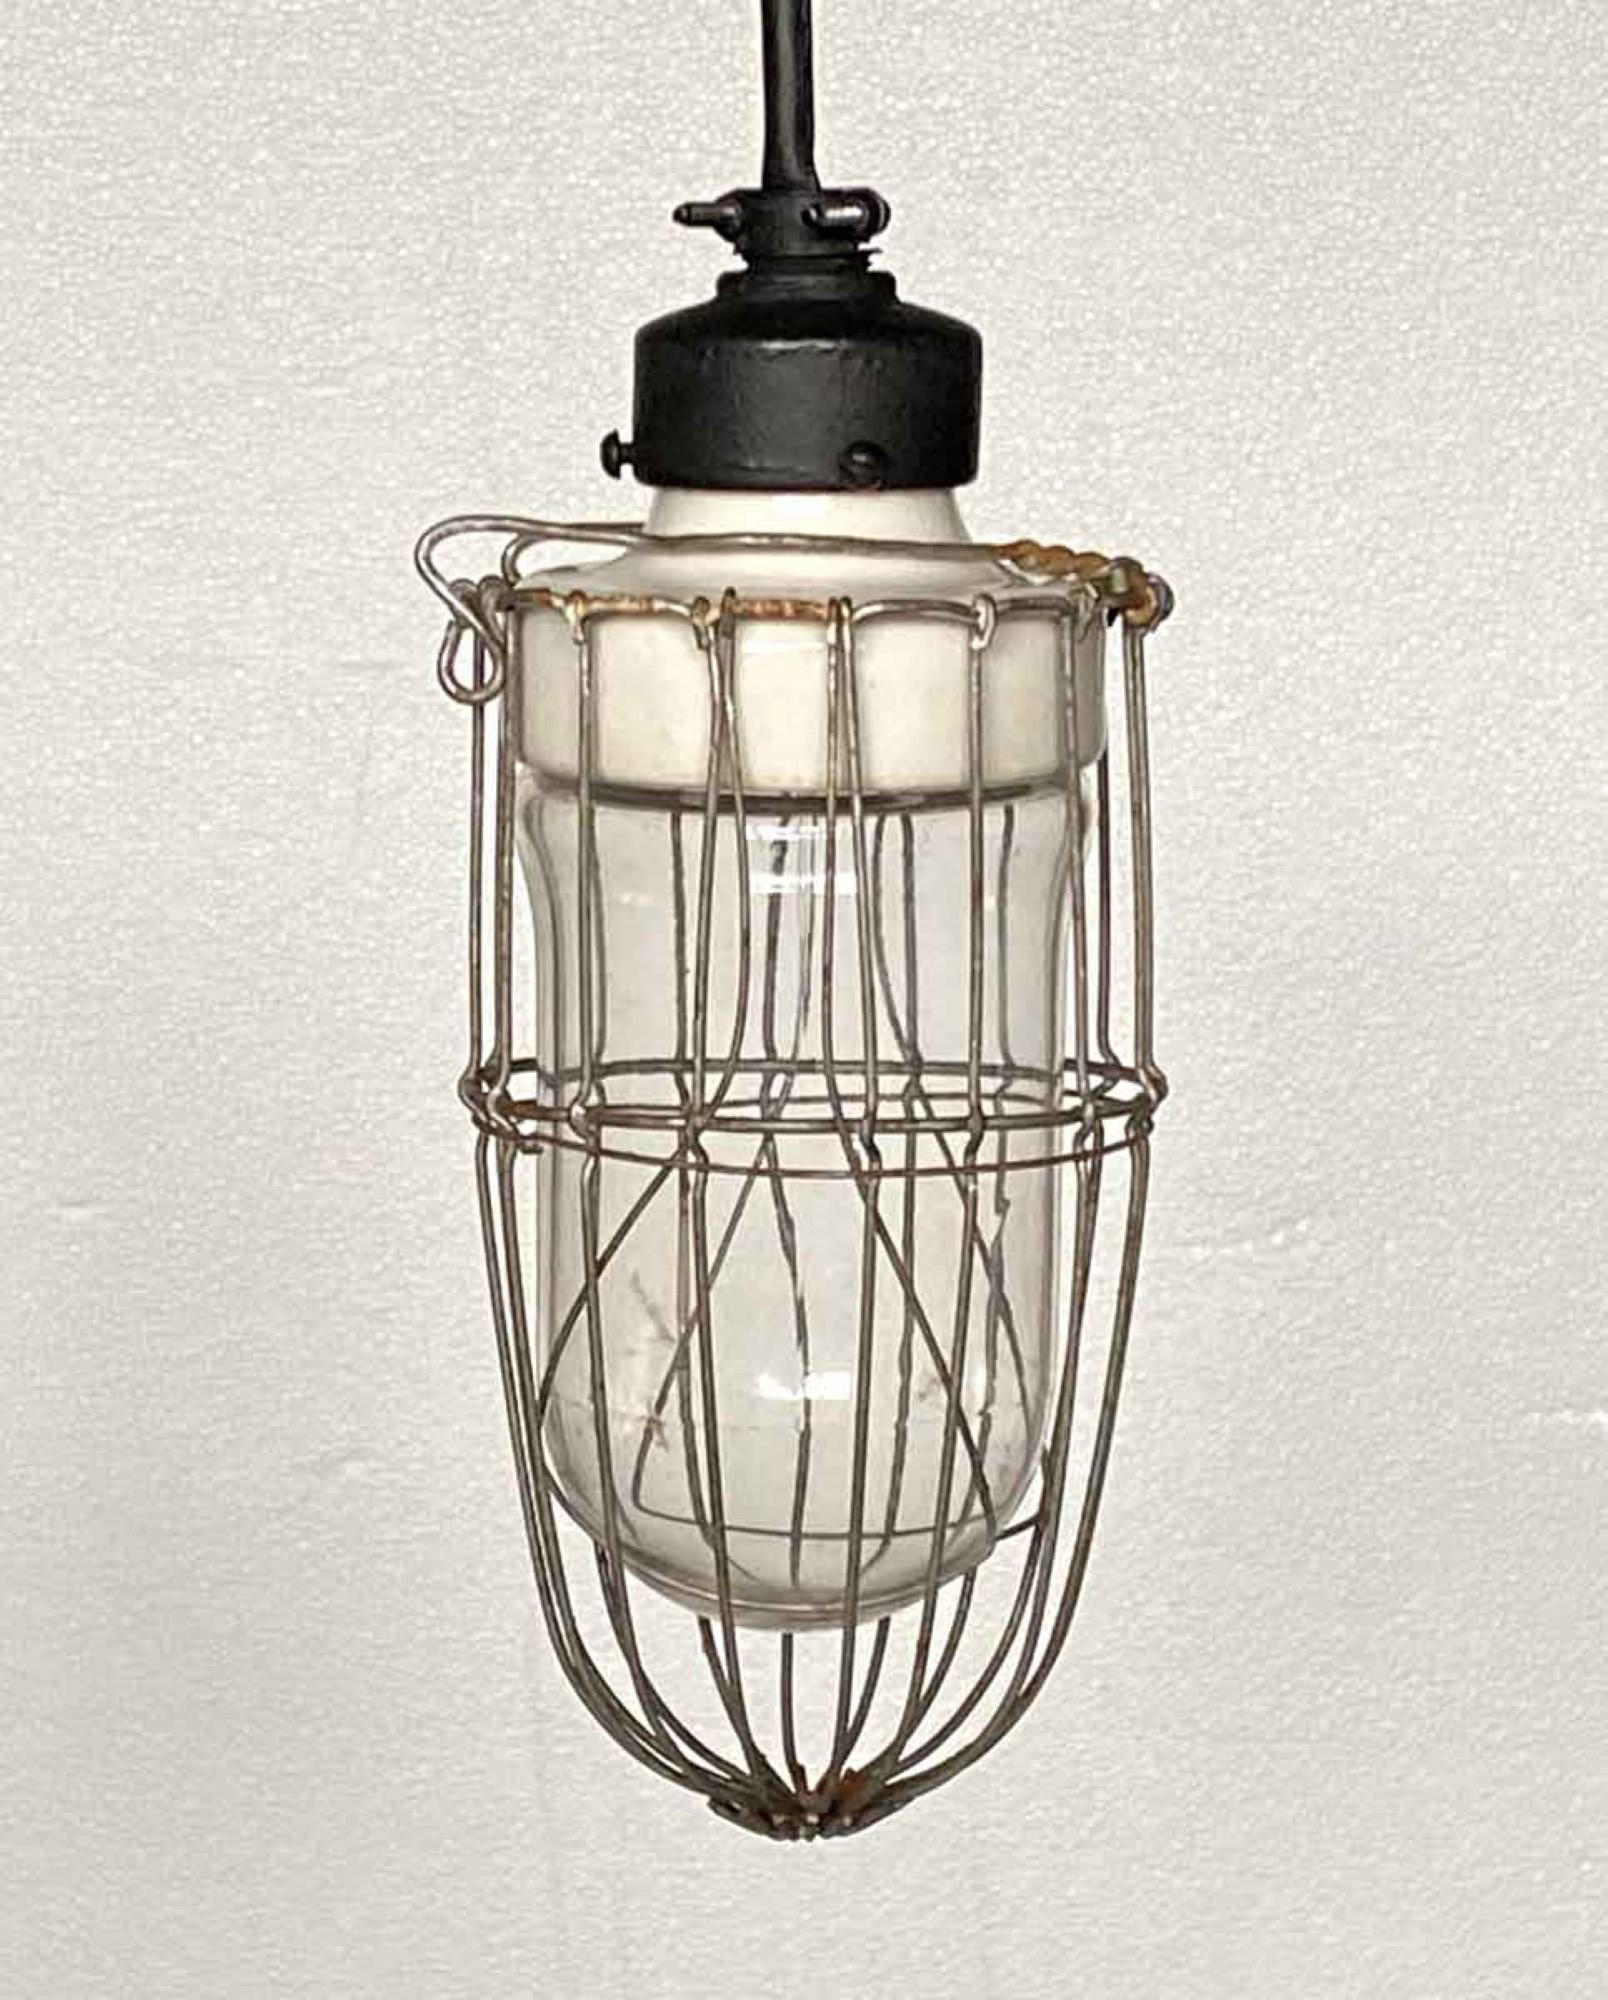 Industrial cage light with thick original porcelain fixture, circa 1920. This has been recently rewired with a long cord and matching black canopy. Please specify the overall drop that is needed upon purchasing. Please note, this item is located in